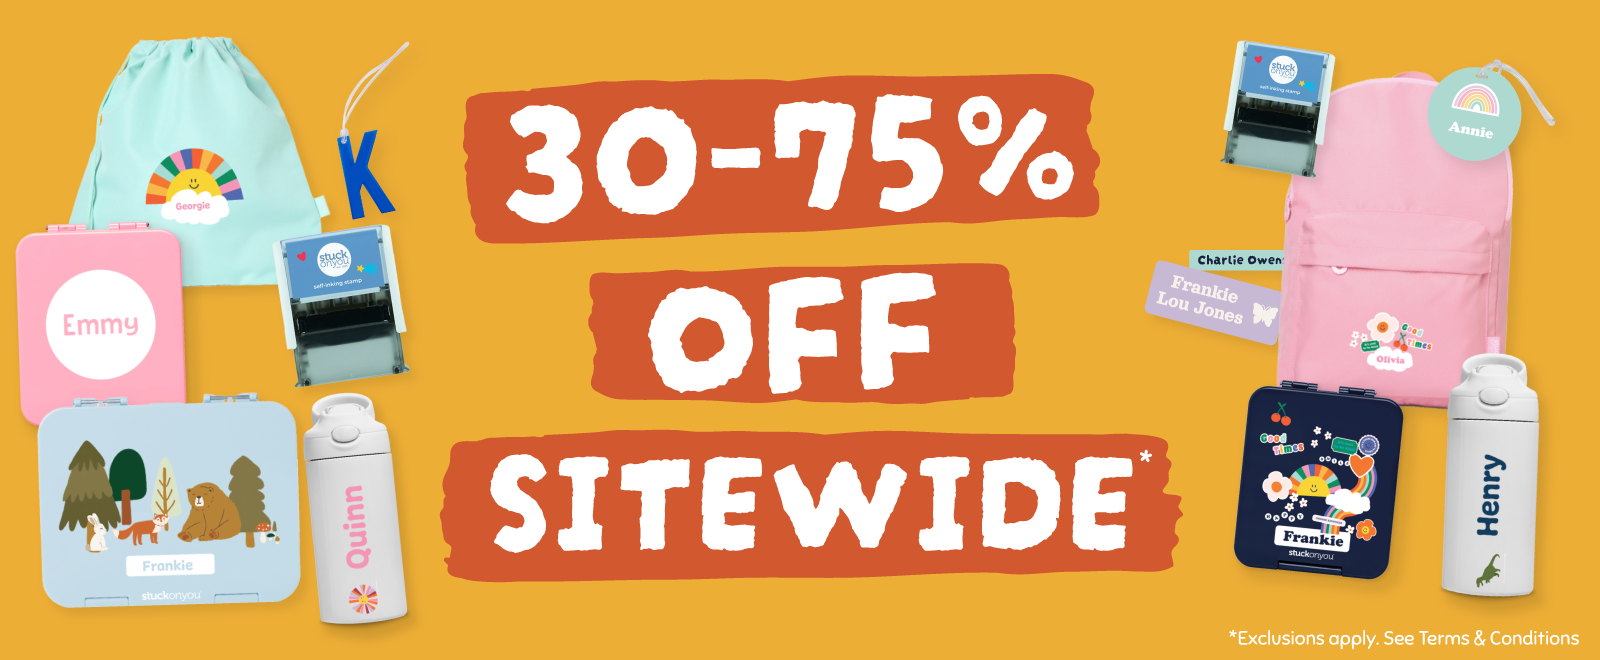 30 TO 75% OFF Sitewide